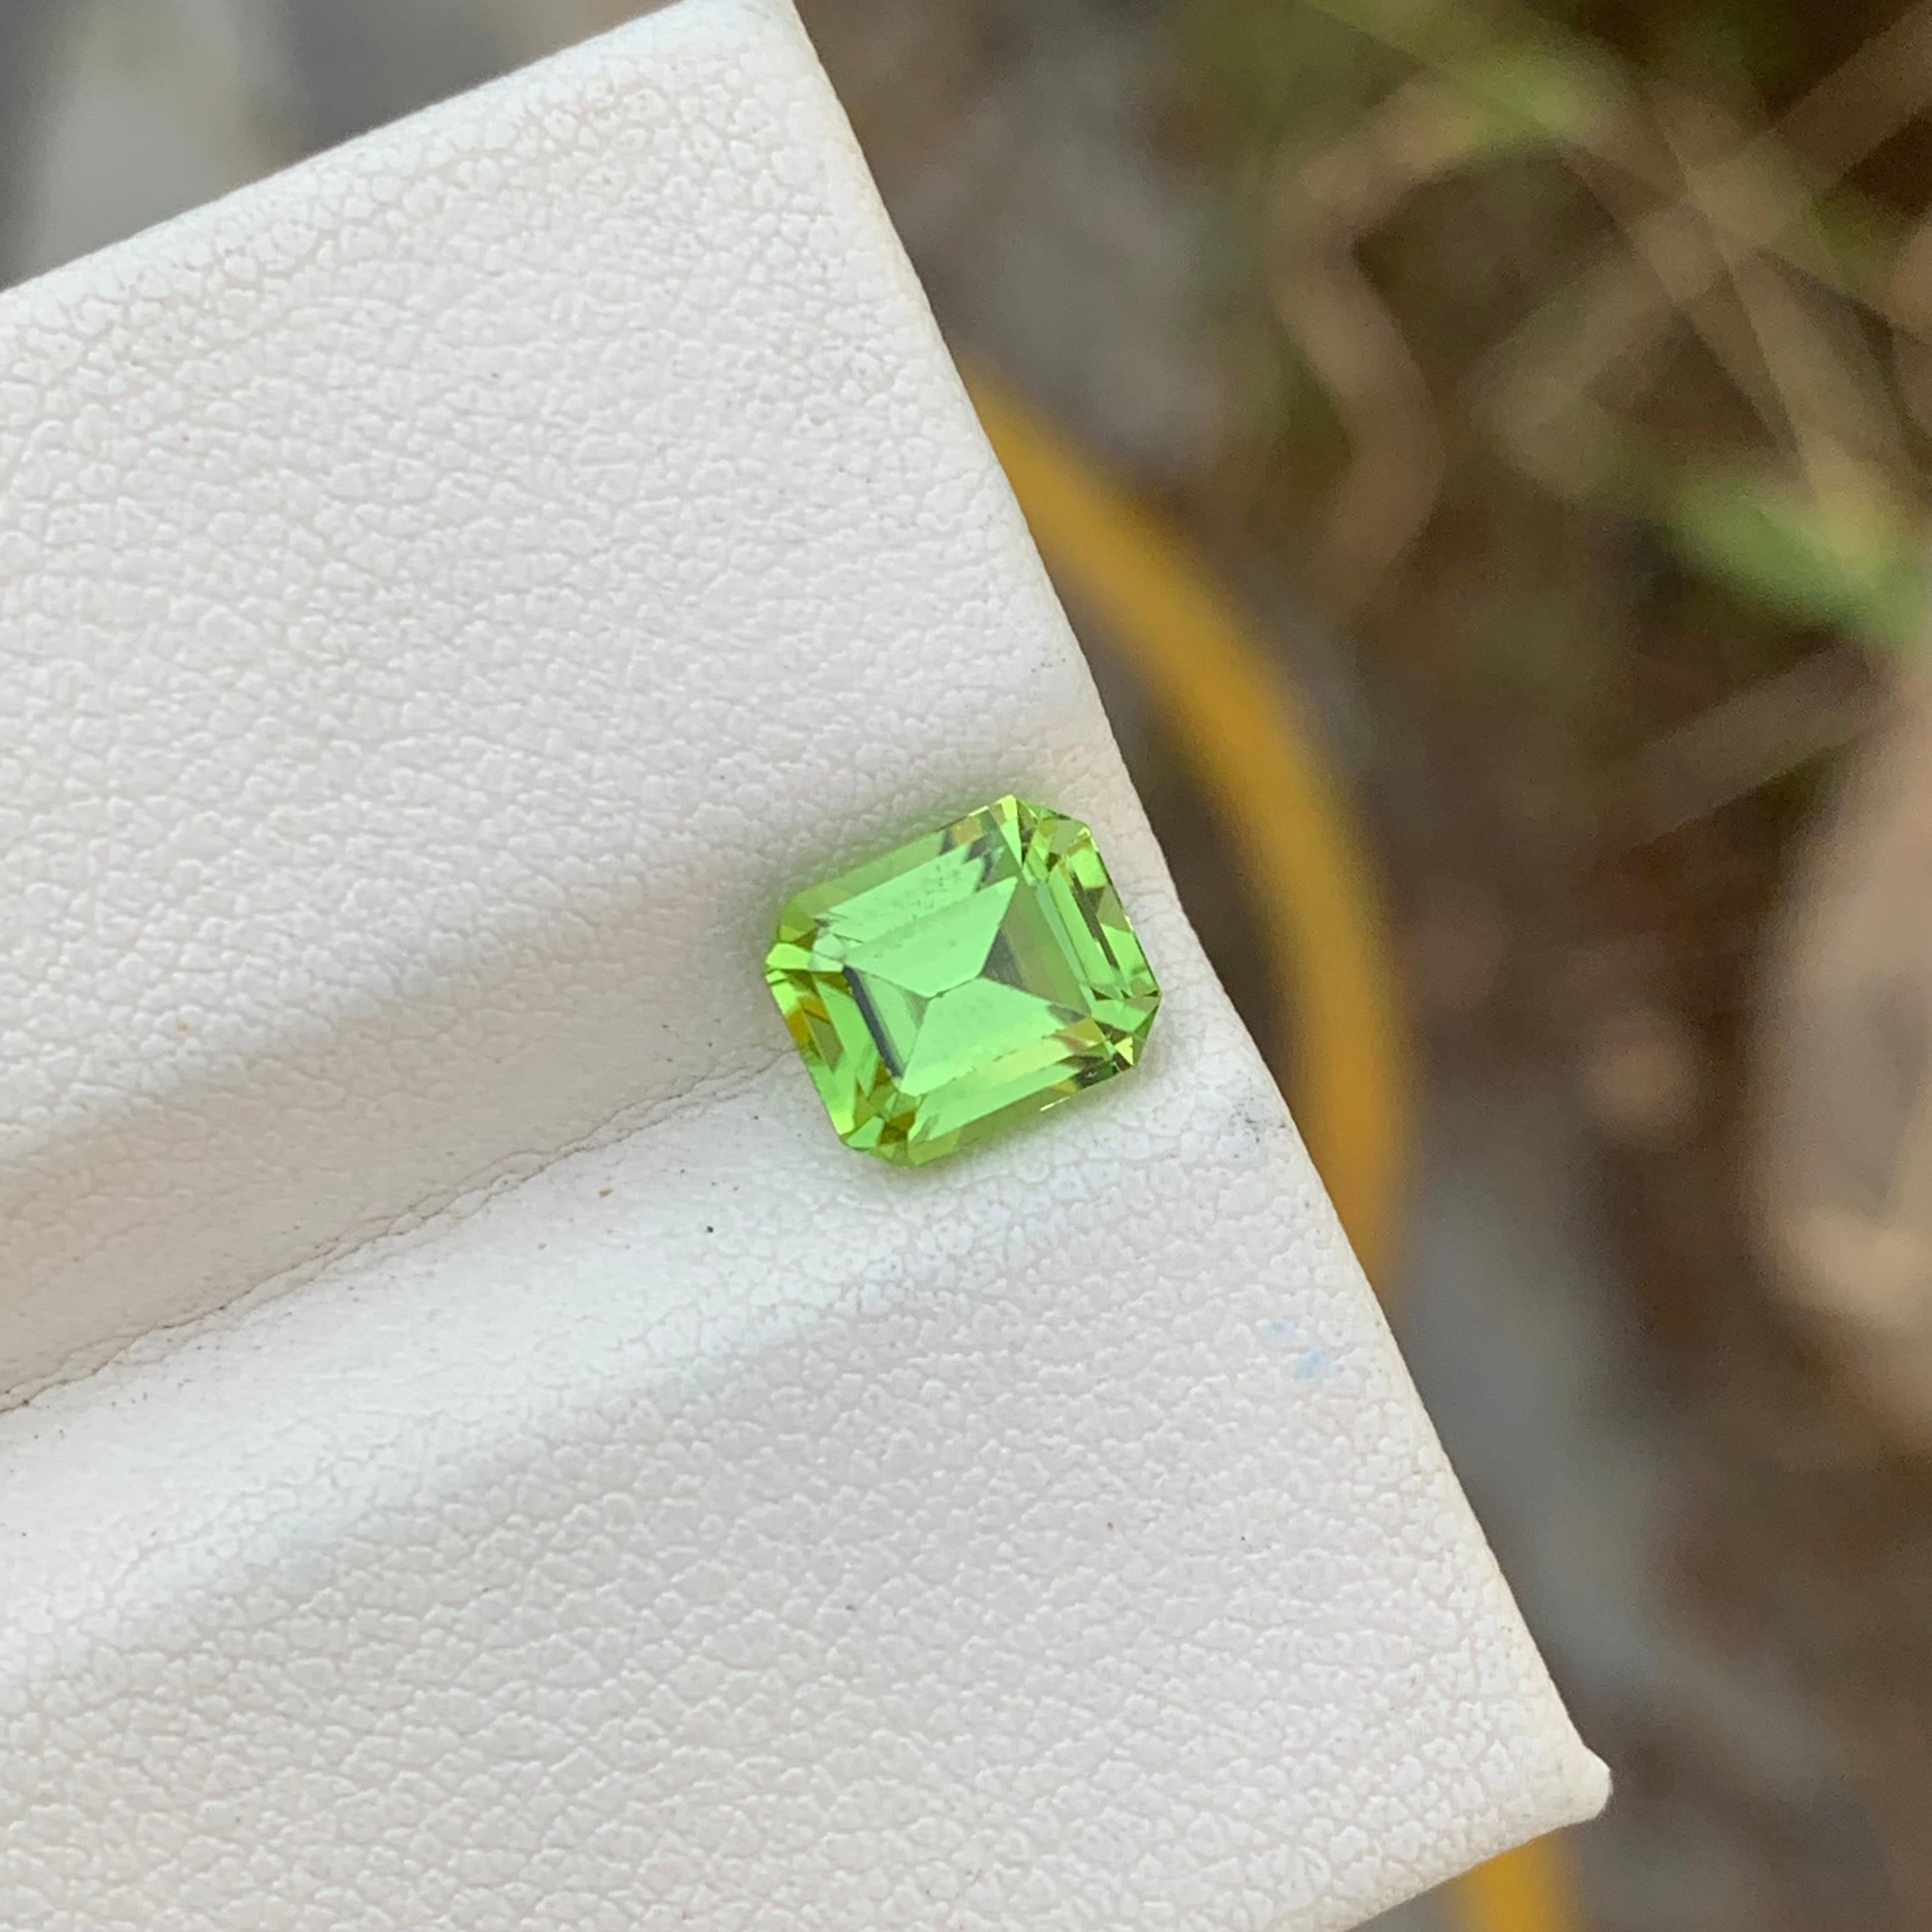 Loose Peridot
Weight: 1.95 Carats 
Dimension: 7.3x6.1x5 Mm
Origin: Pakistan
Shape: Emerald 
Color: Green
Treatment: Non
Peridot is a captivating gemstone with a rich history and vibrant green color, making it a popular choice for jewelry and other